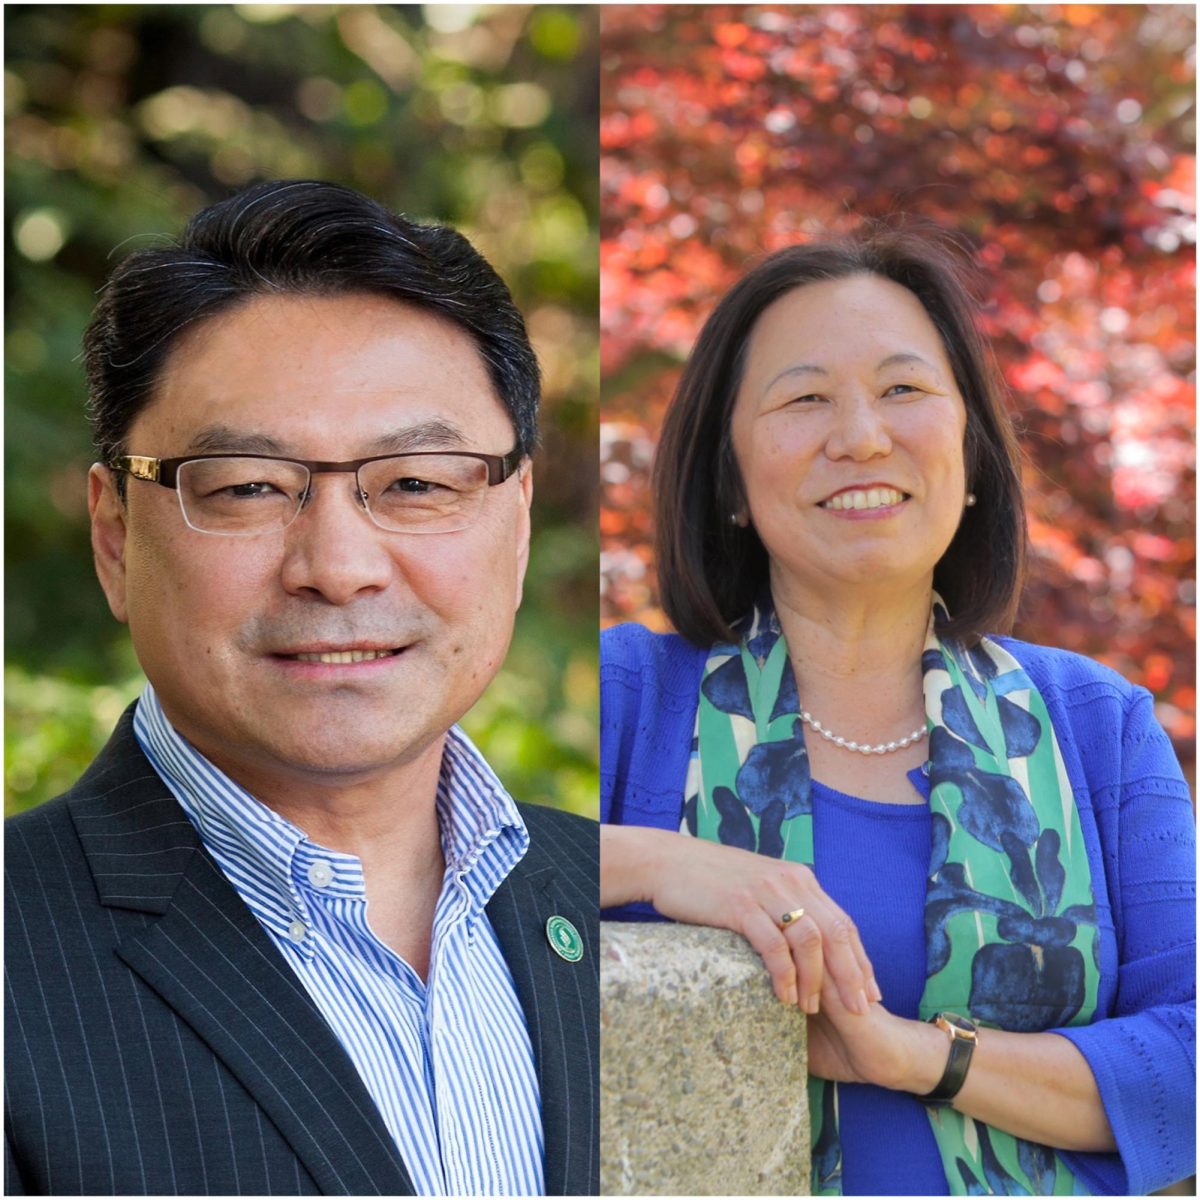 [Both photos courtesy of sonoma.edu]
Ming-Ting Mike Lee stepped in as the new SSU president following Sakakis resignation in July 2022